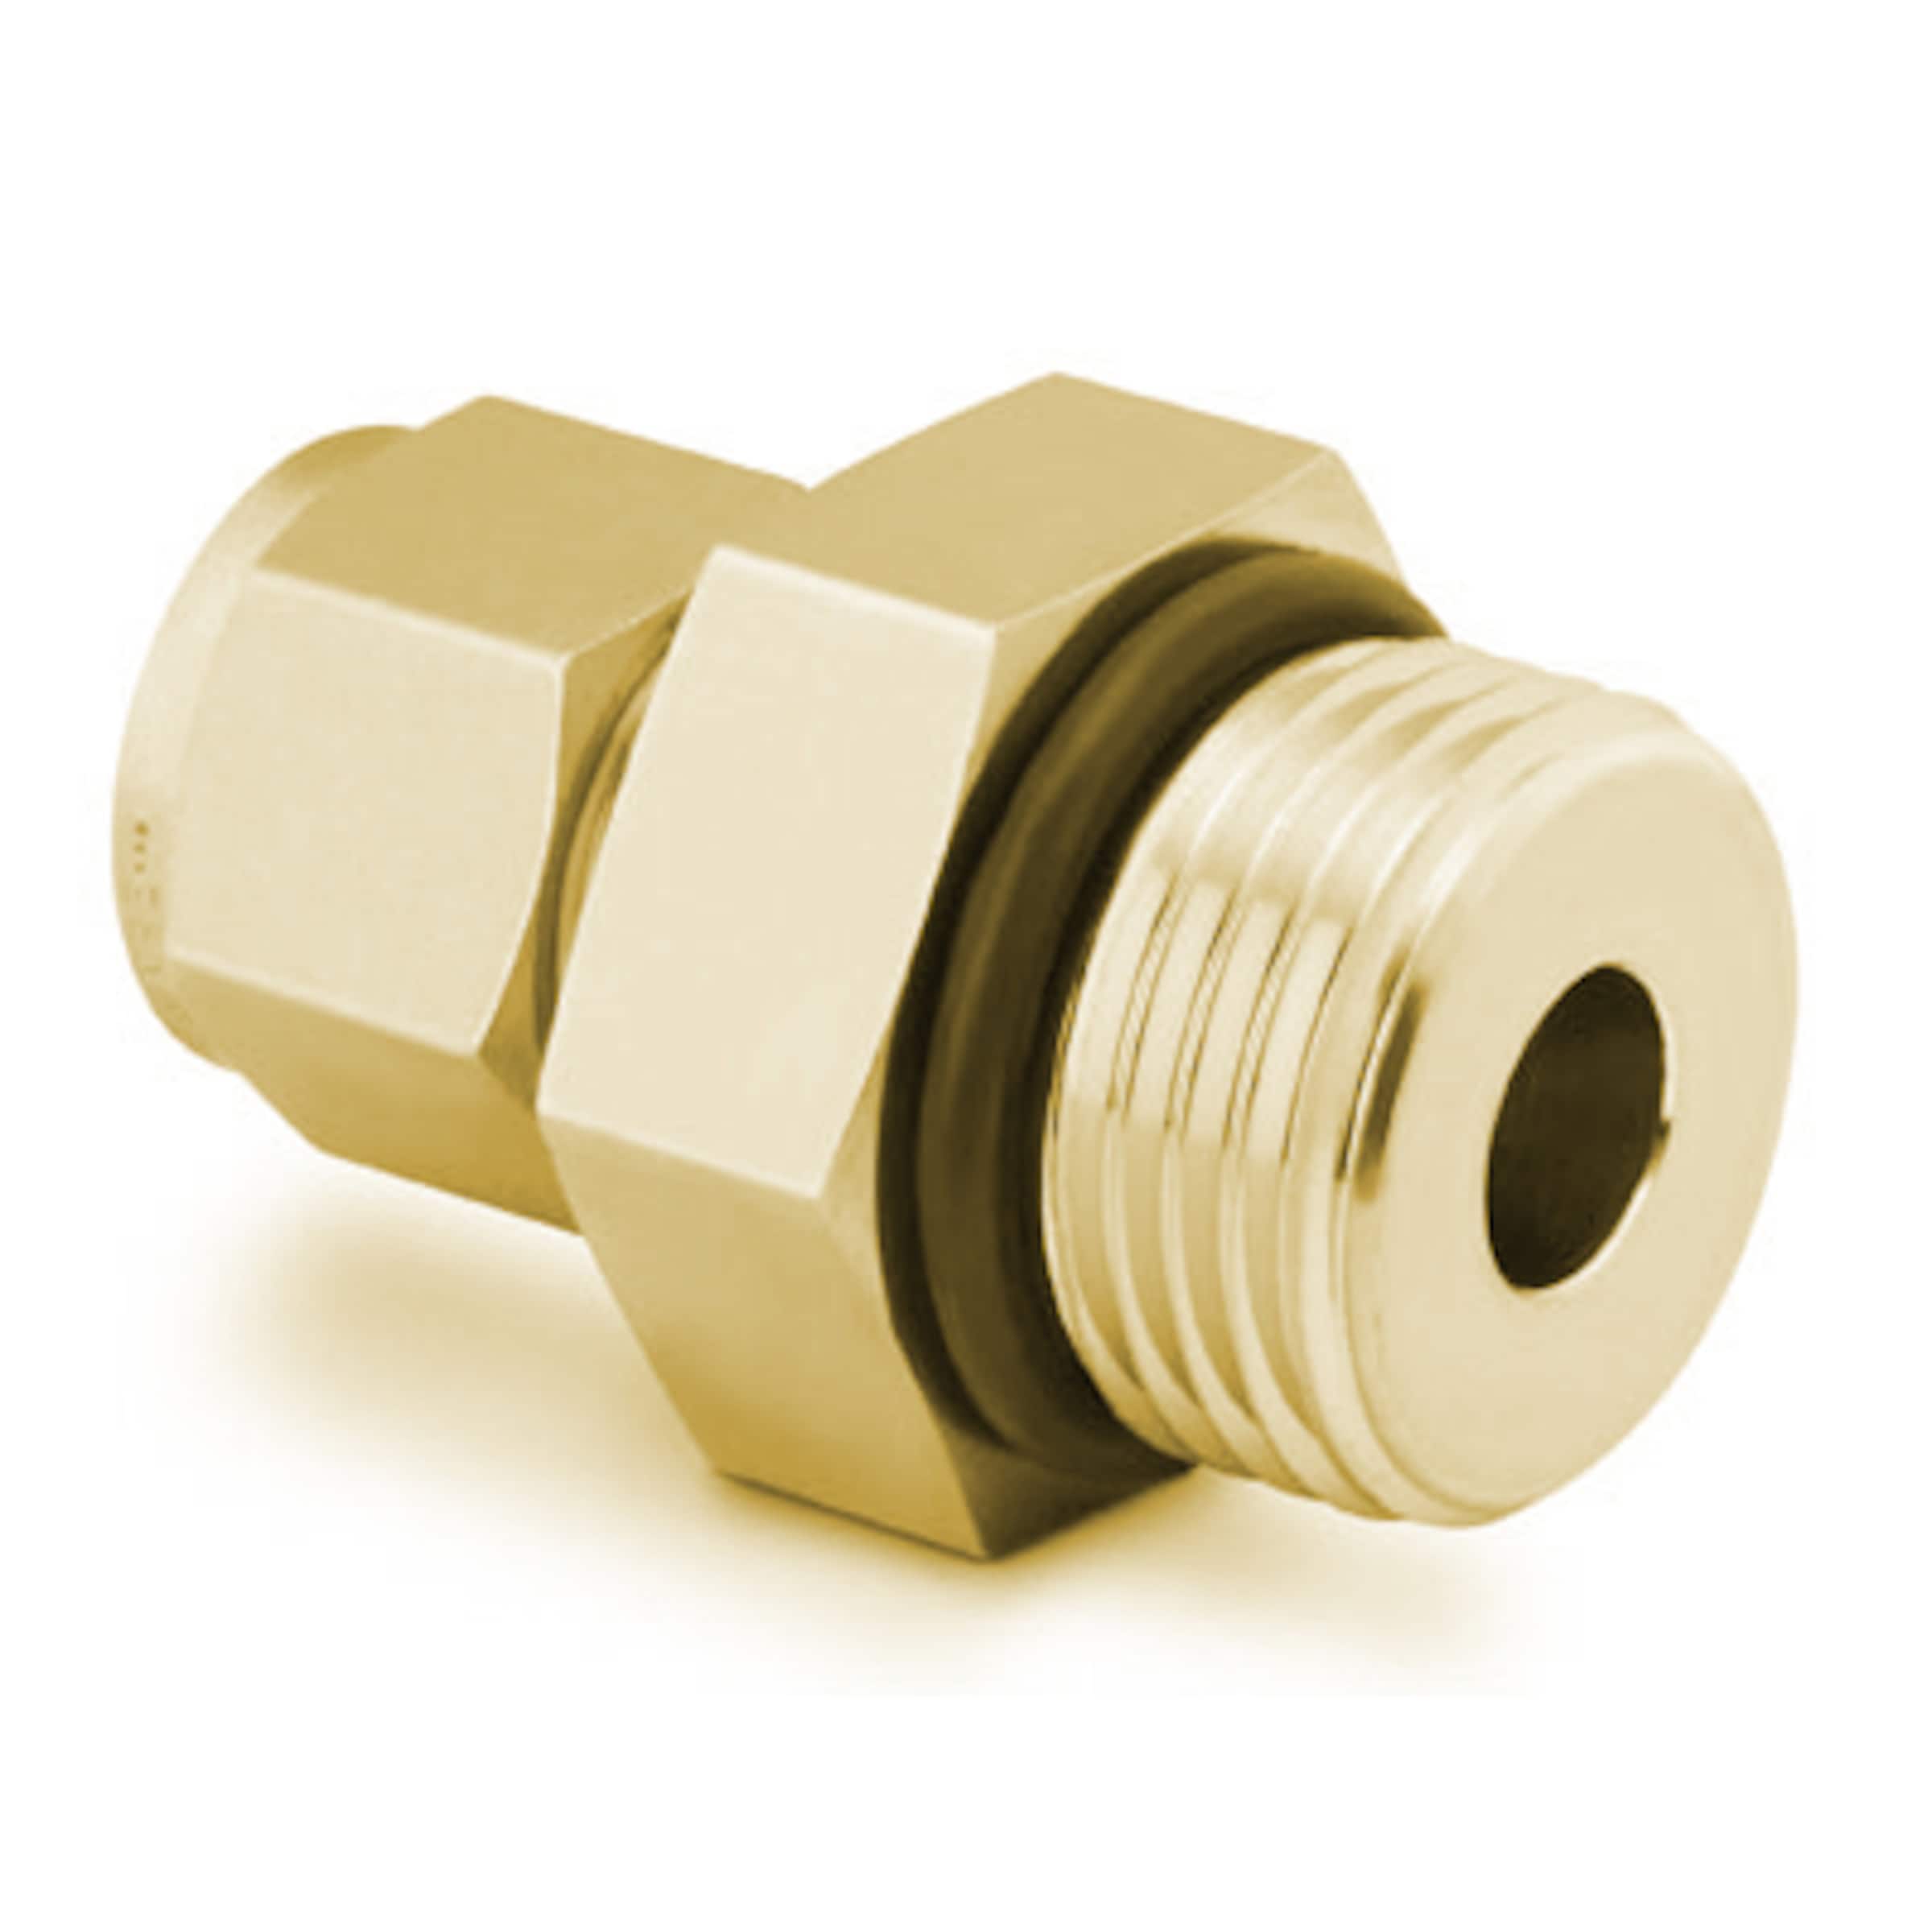 Brass Swagelok Tube Fitting, Male Connector, 1/4 in. Tube OD x 7